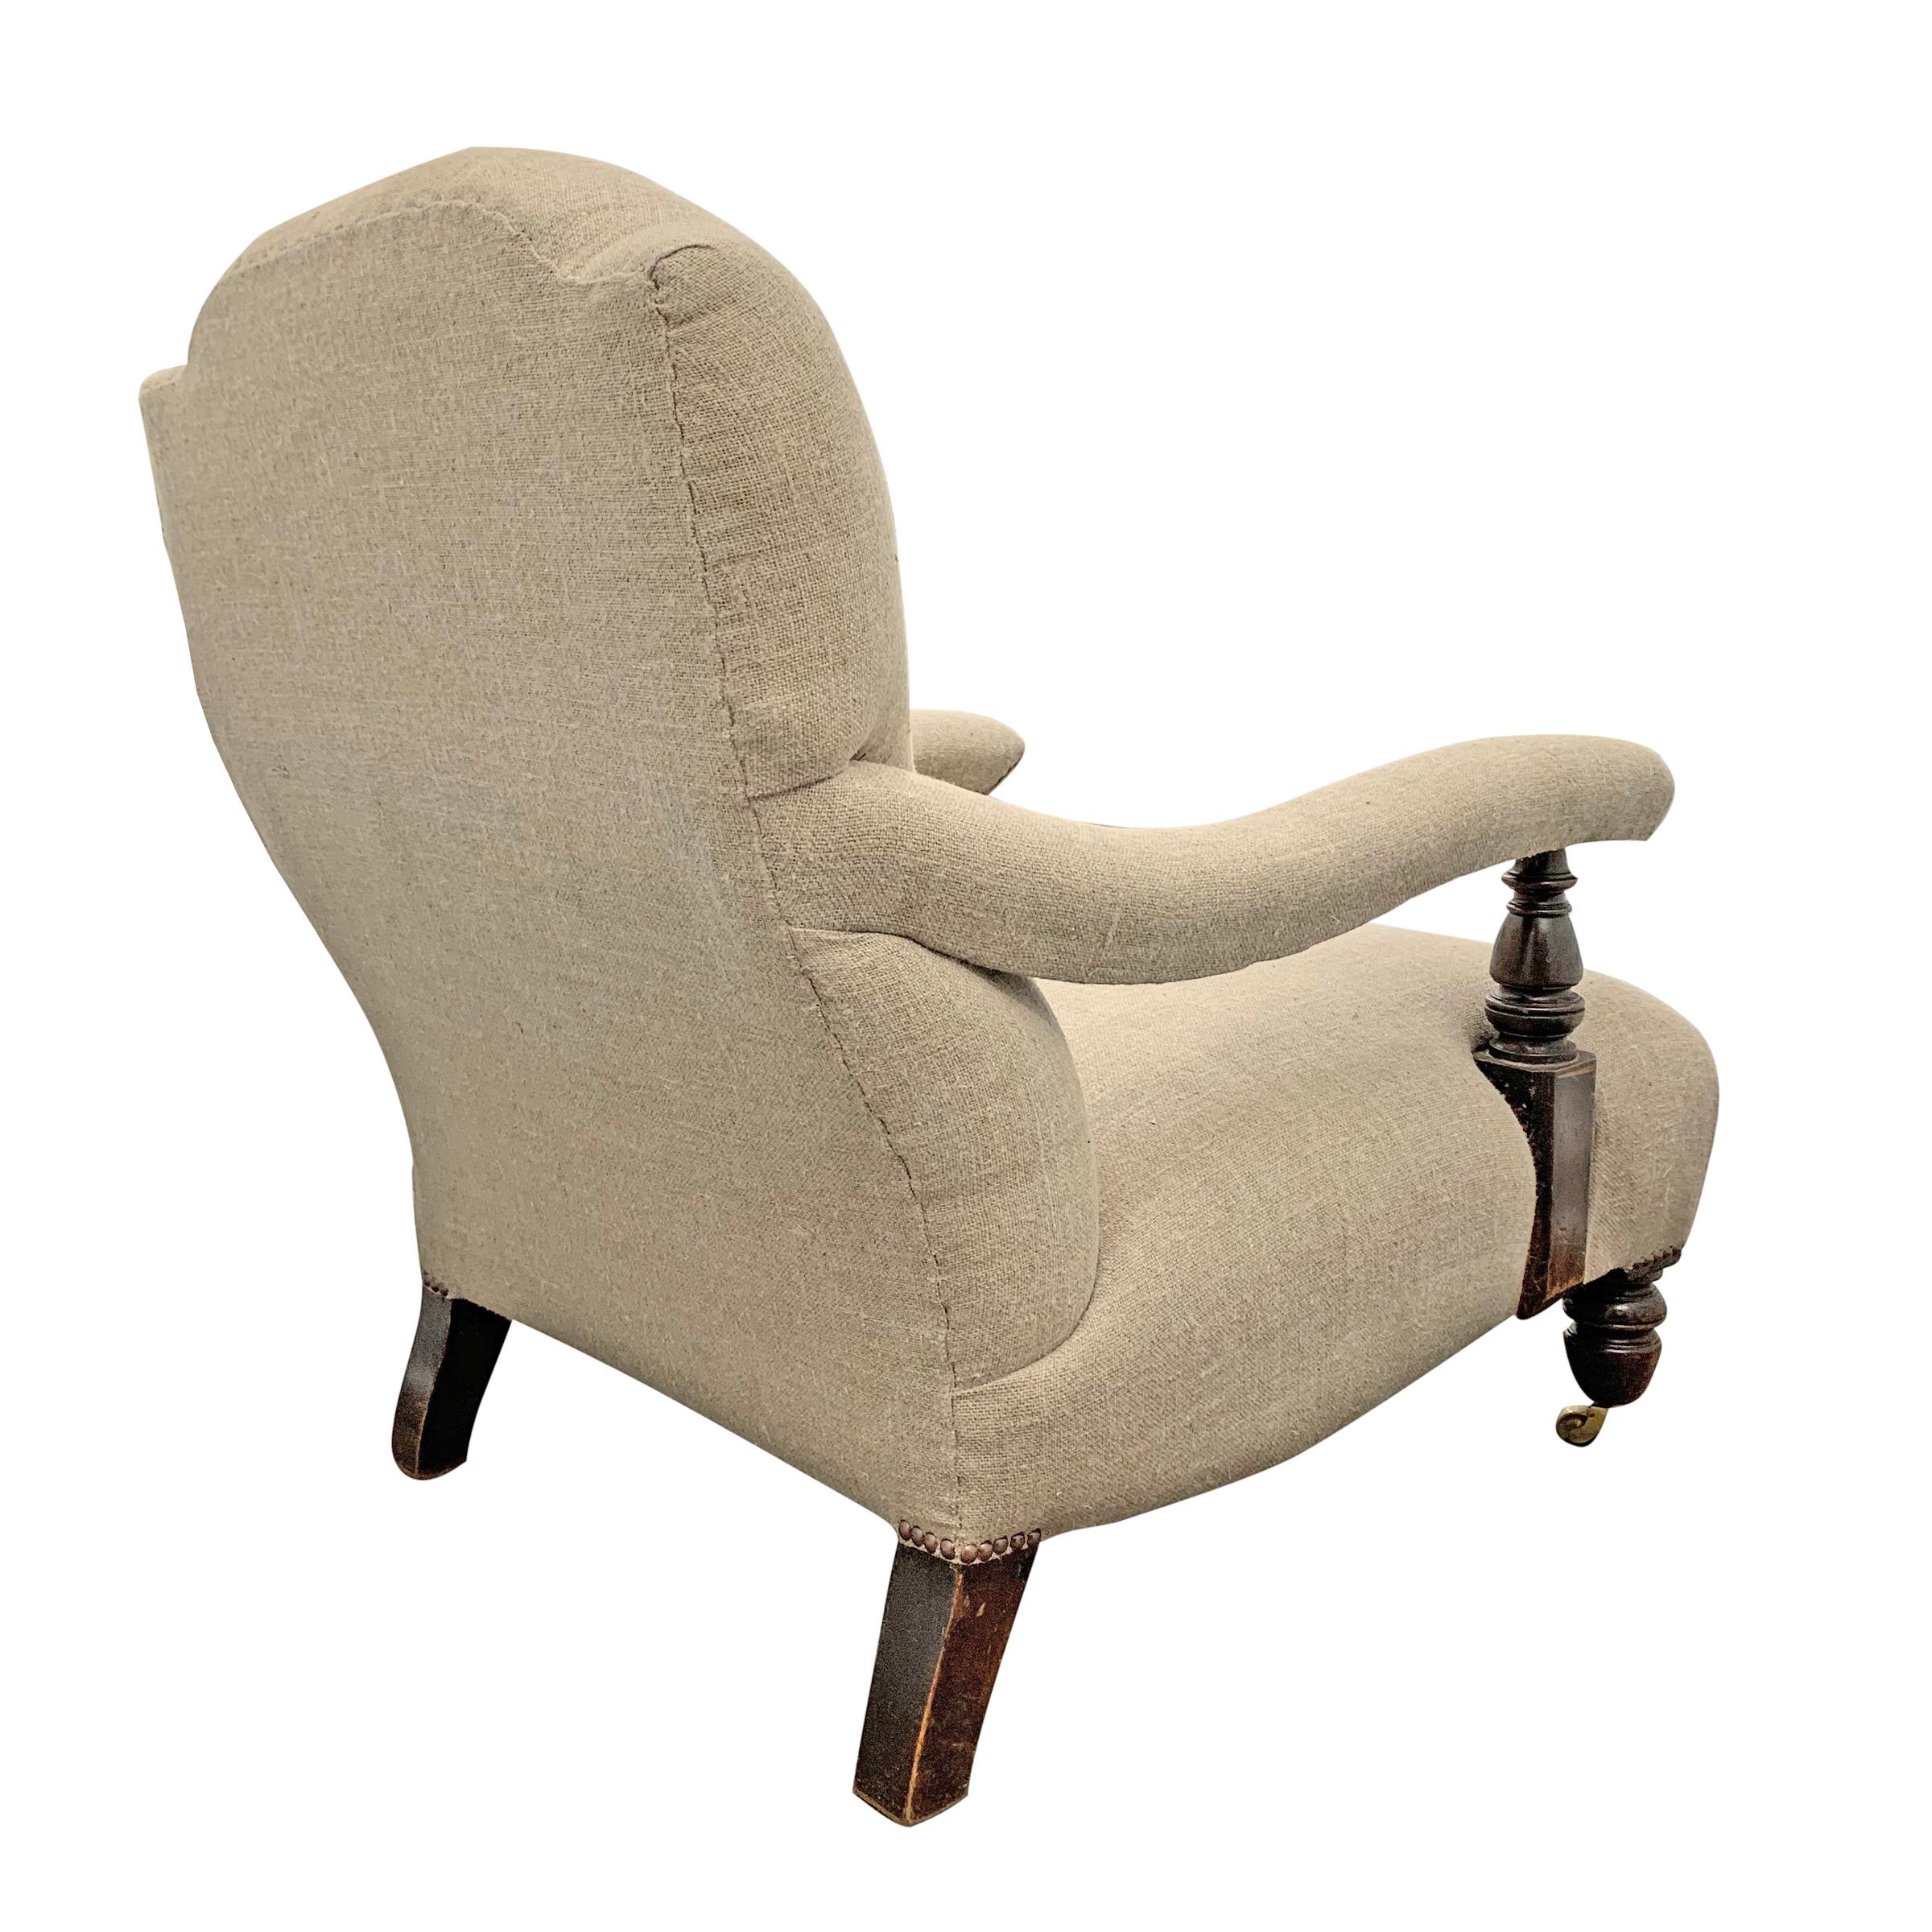 Edwardian 19th Century English Country House Armchair